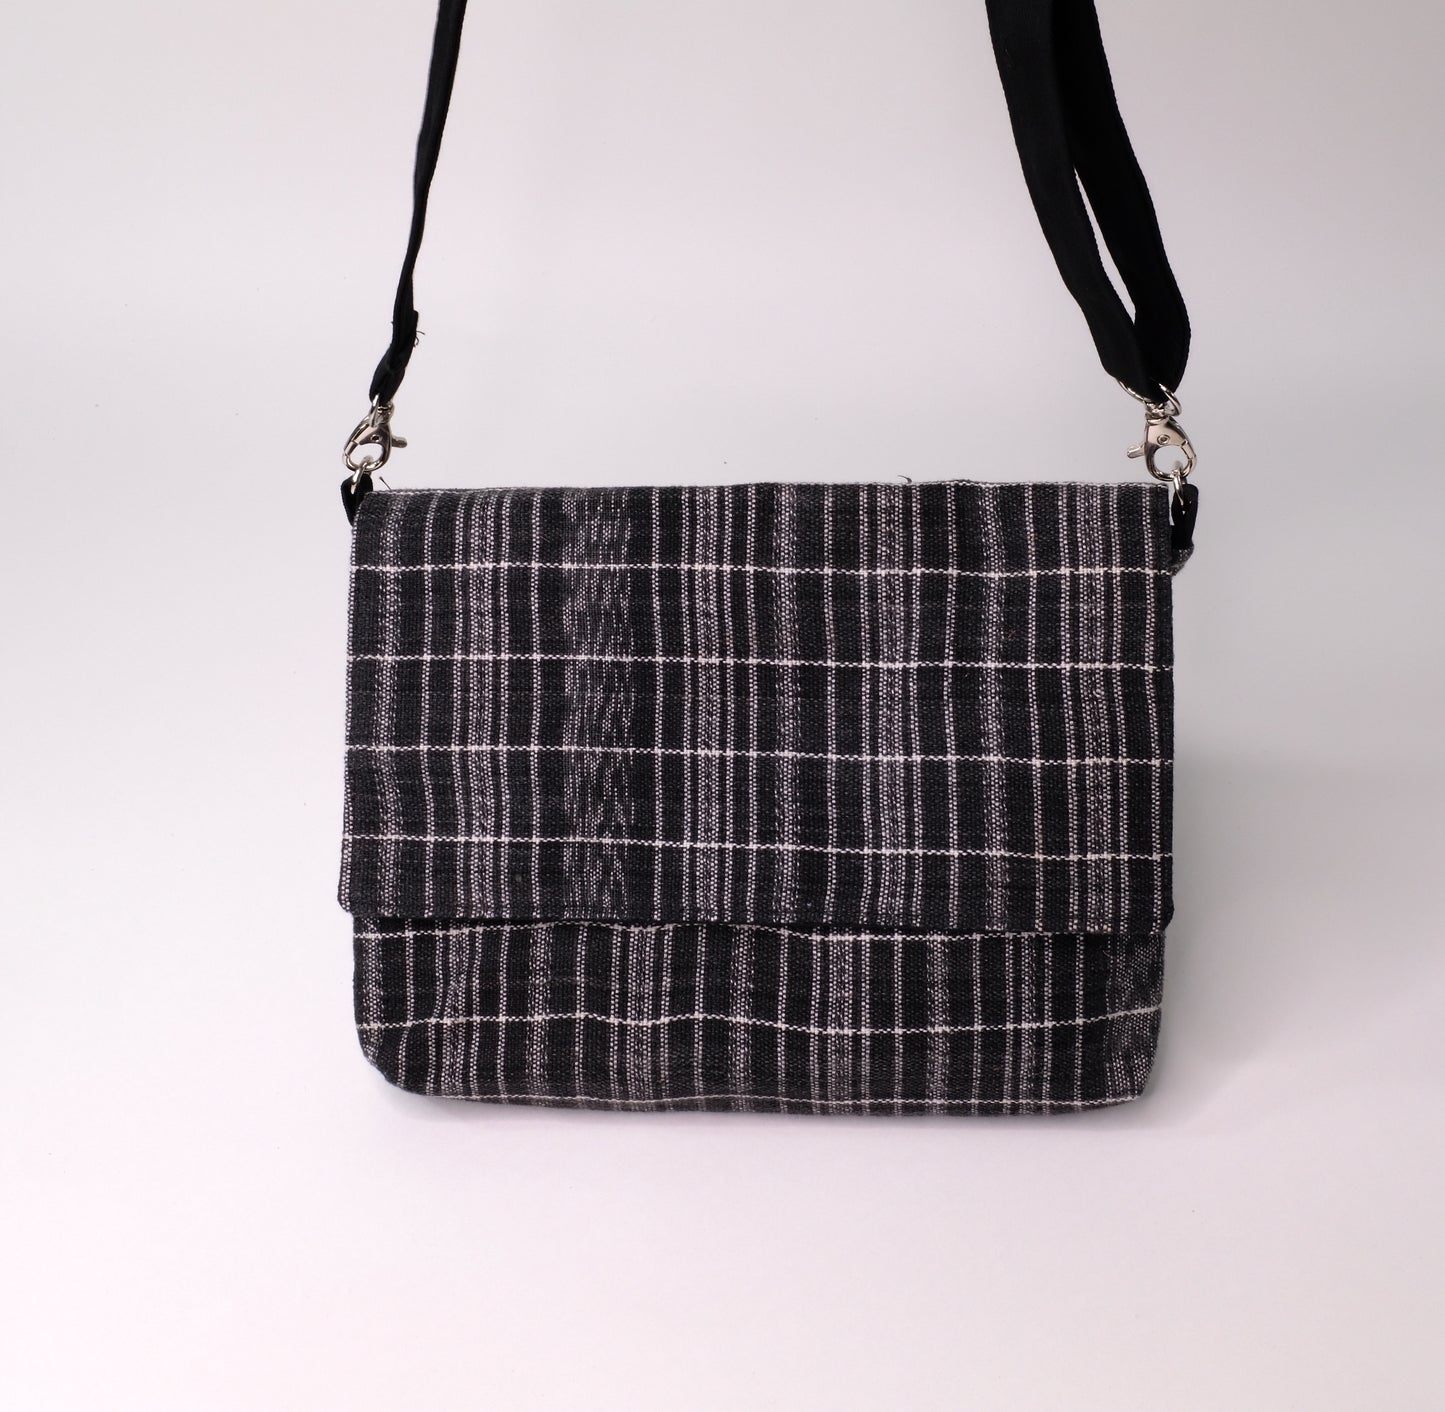 Crossbody bag is constructed with carefully handwoven black ikat cotton textiles.